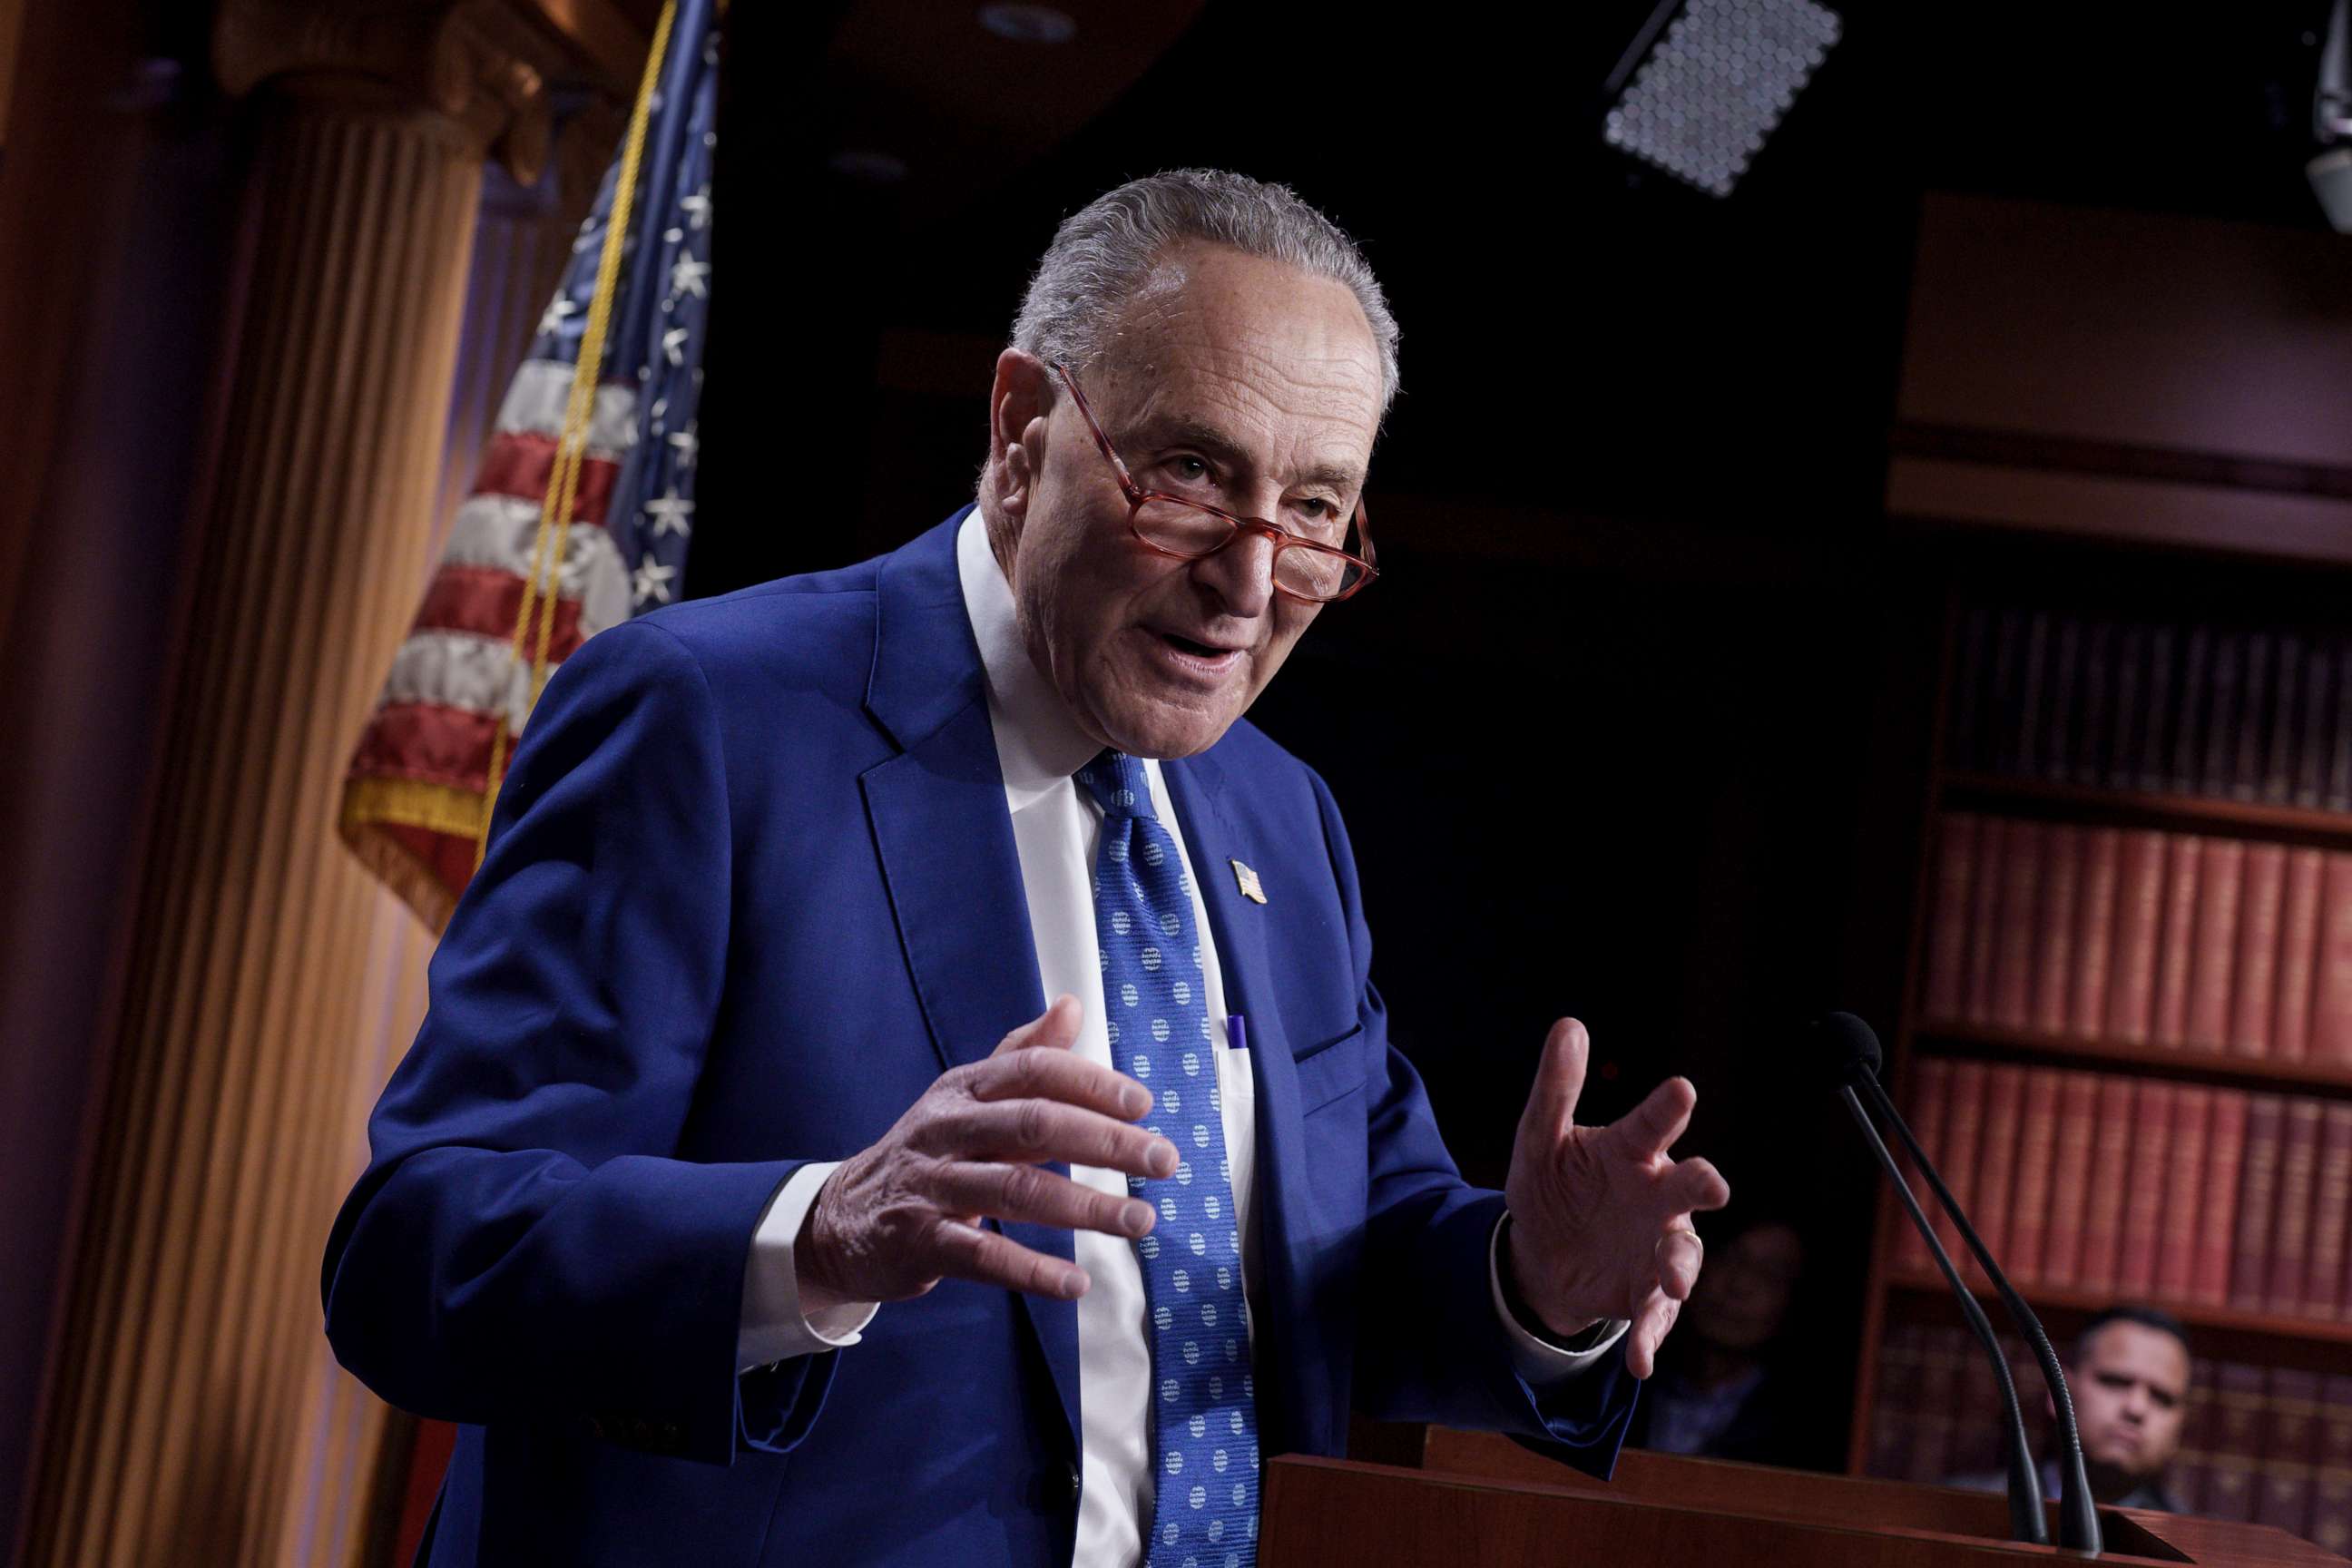 PHOTO: Senate Majority Leader Chuck Schumer talks to reporters ahead of the State of the Union address at the Capitol in Washington, D.C., on Feb. 7, 2023.